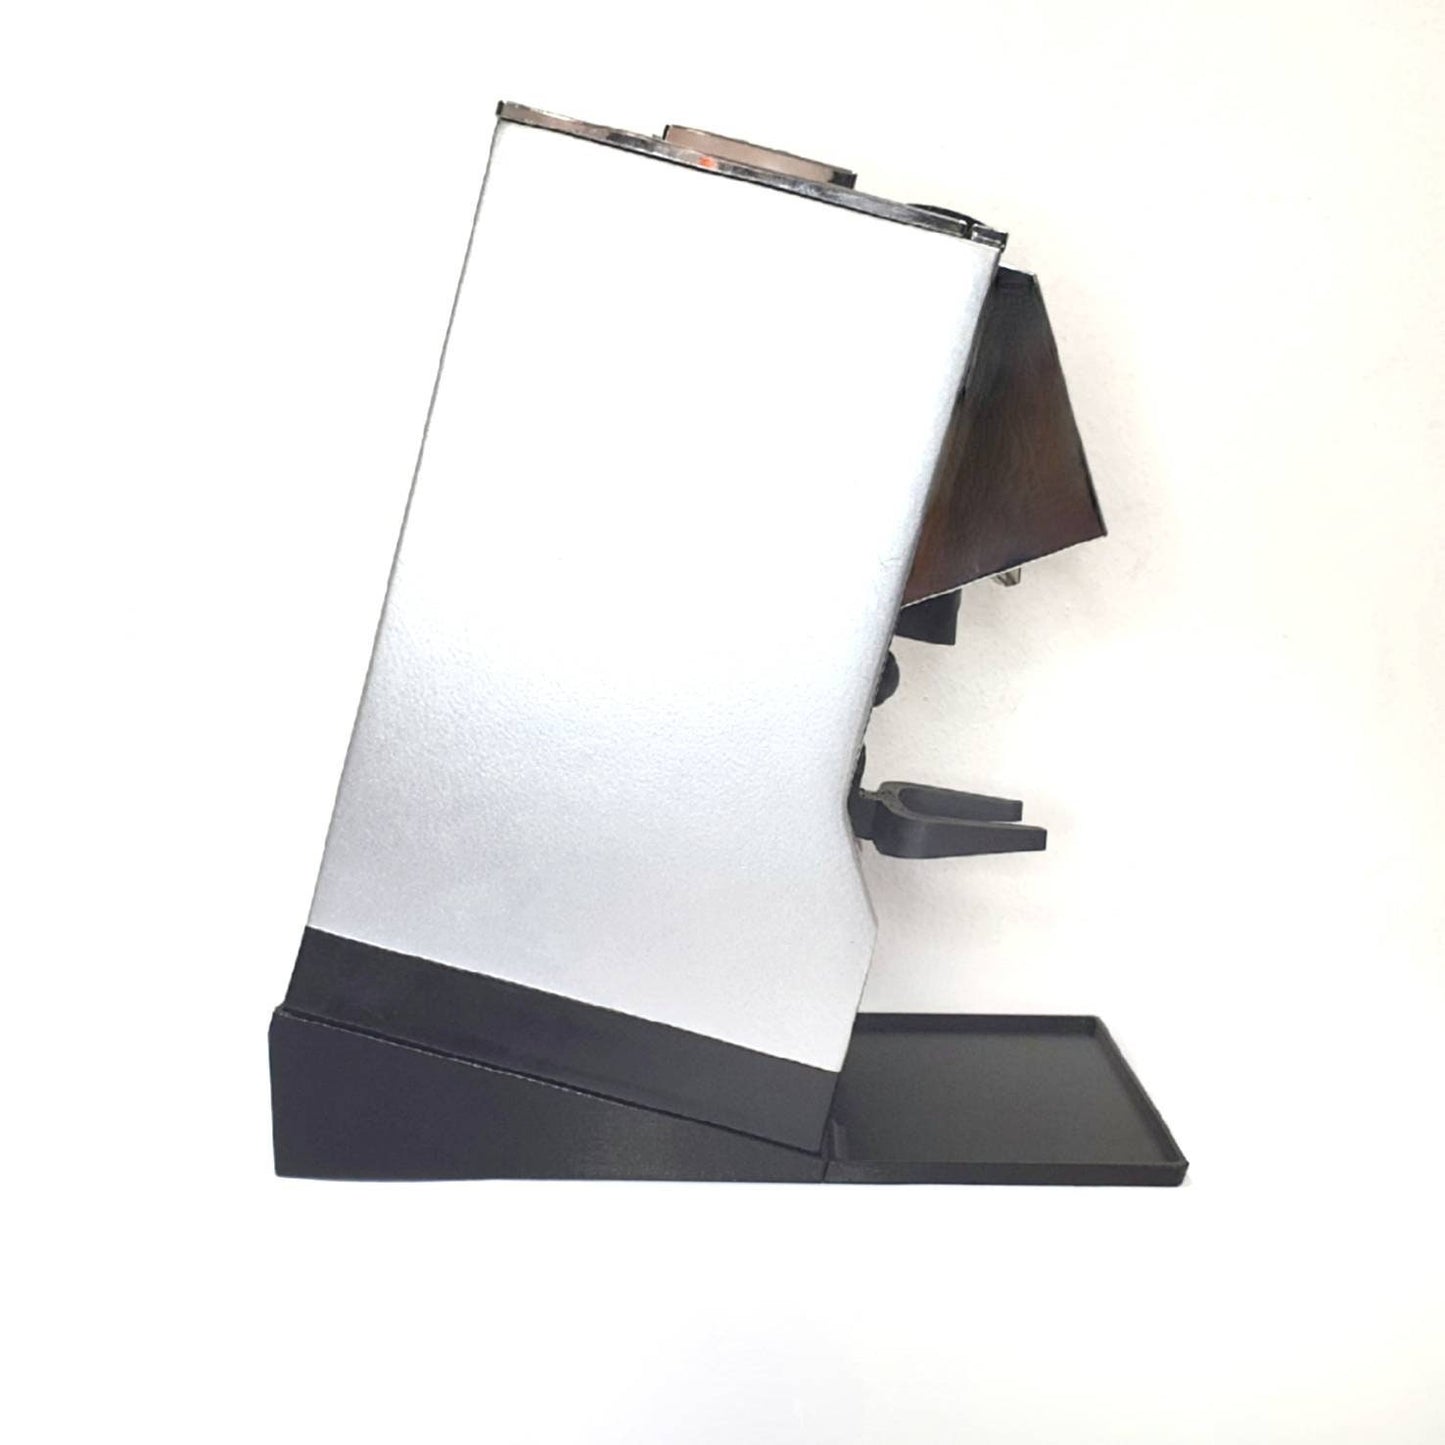 Eureka Mignon Tilted Base Incline Stand with Magnetic Tray - Minimalistic Design